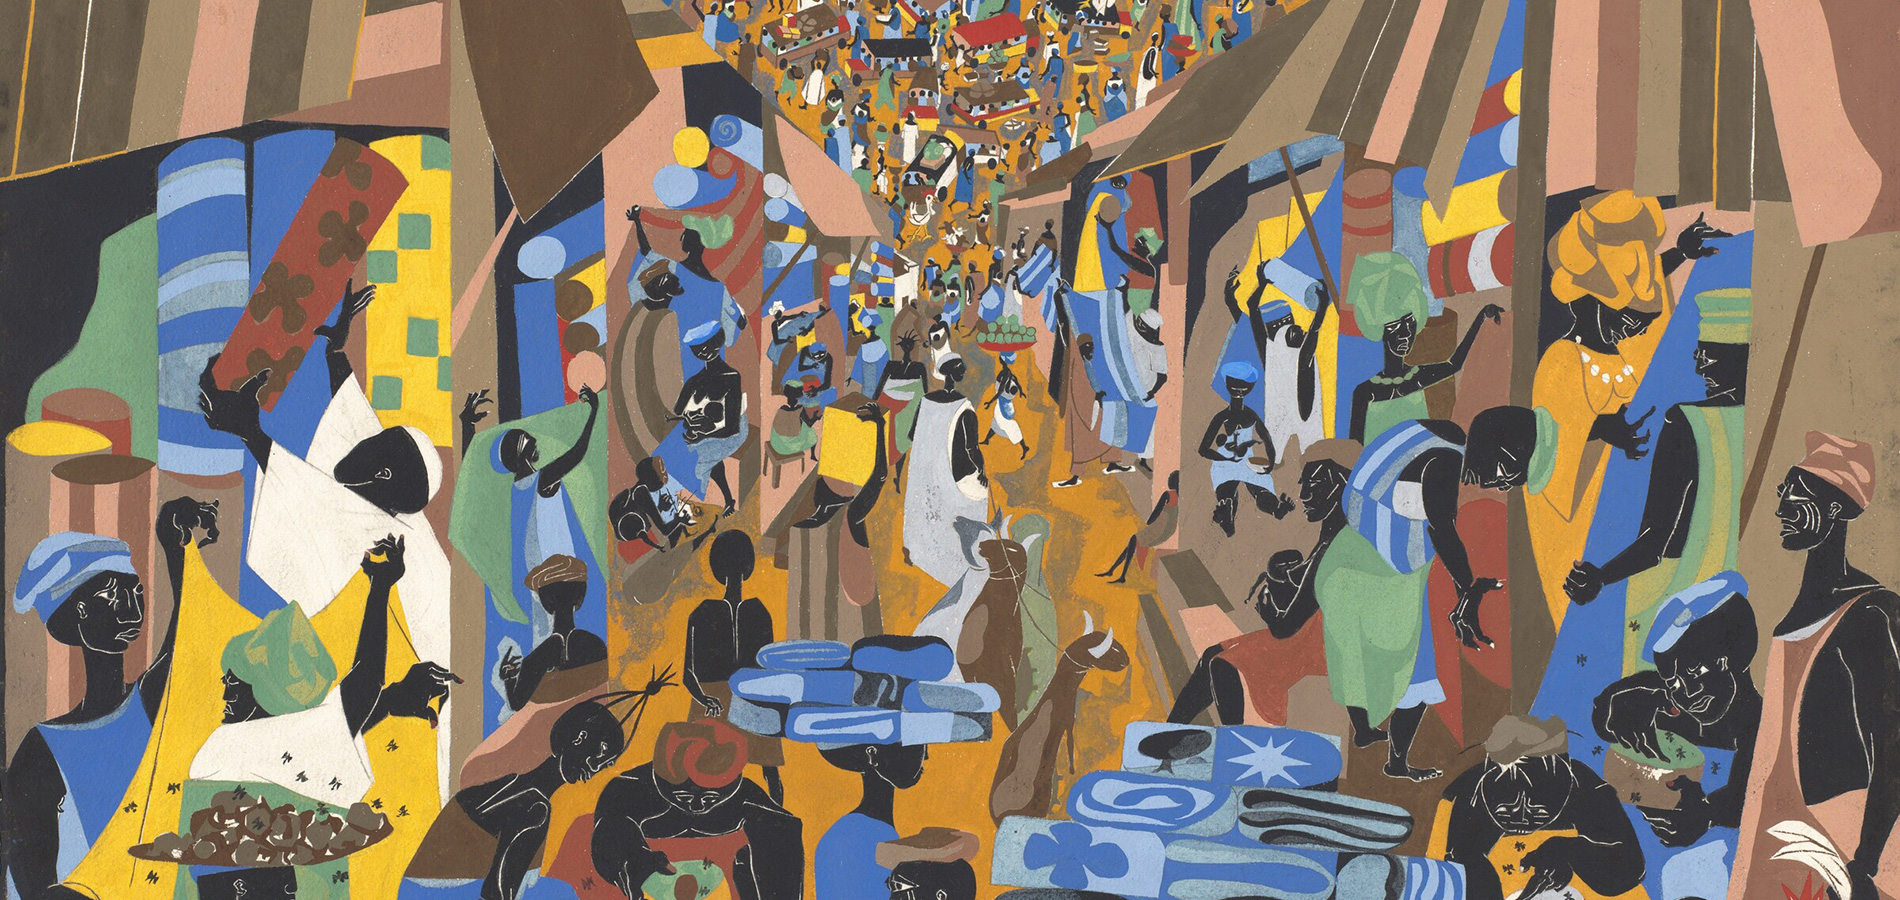 Black artist Jacob Lawrence, Street to Mbari, painting, tempera over graphite on wove paper, National Gallery of Art, 1964